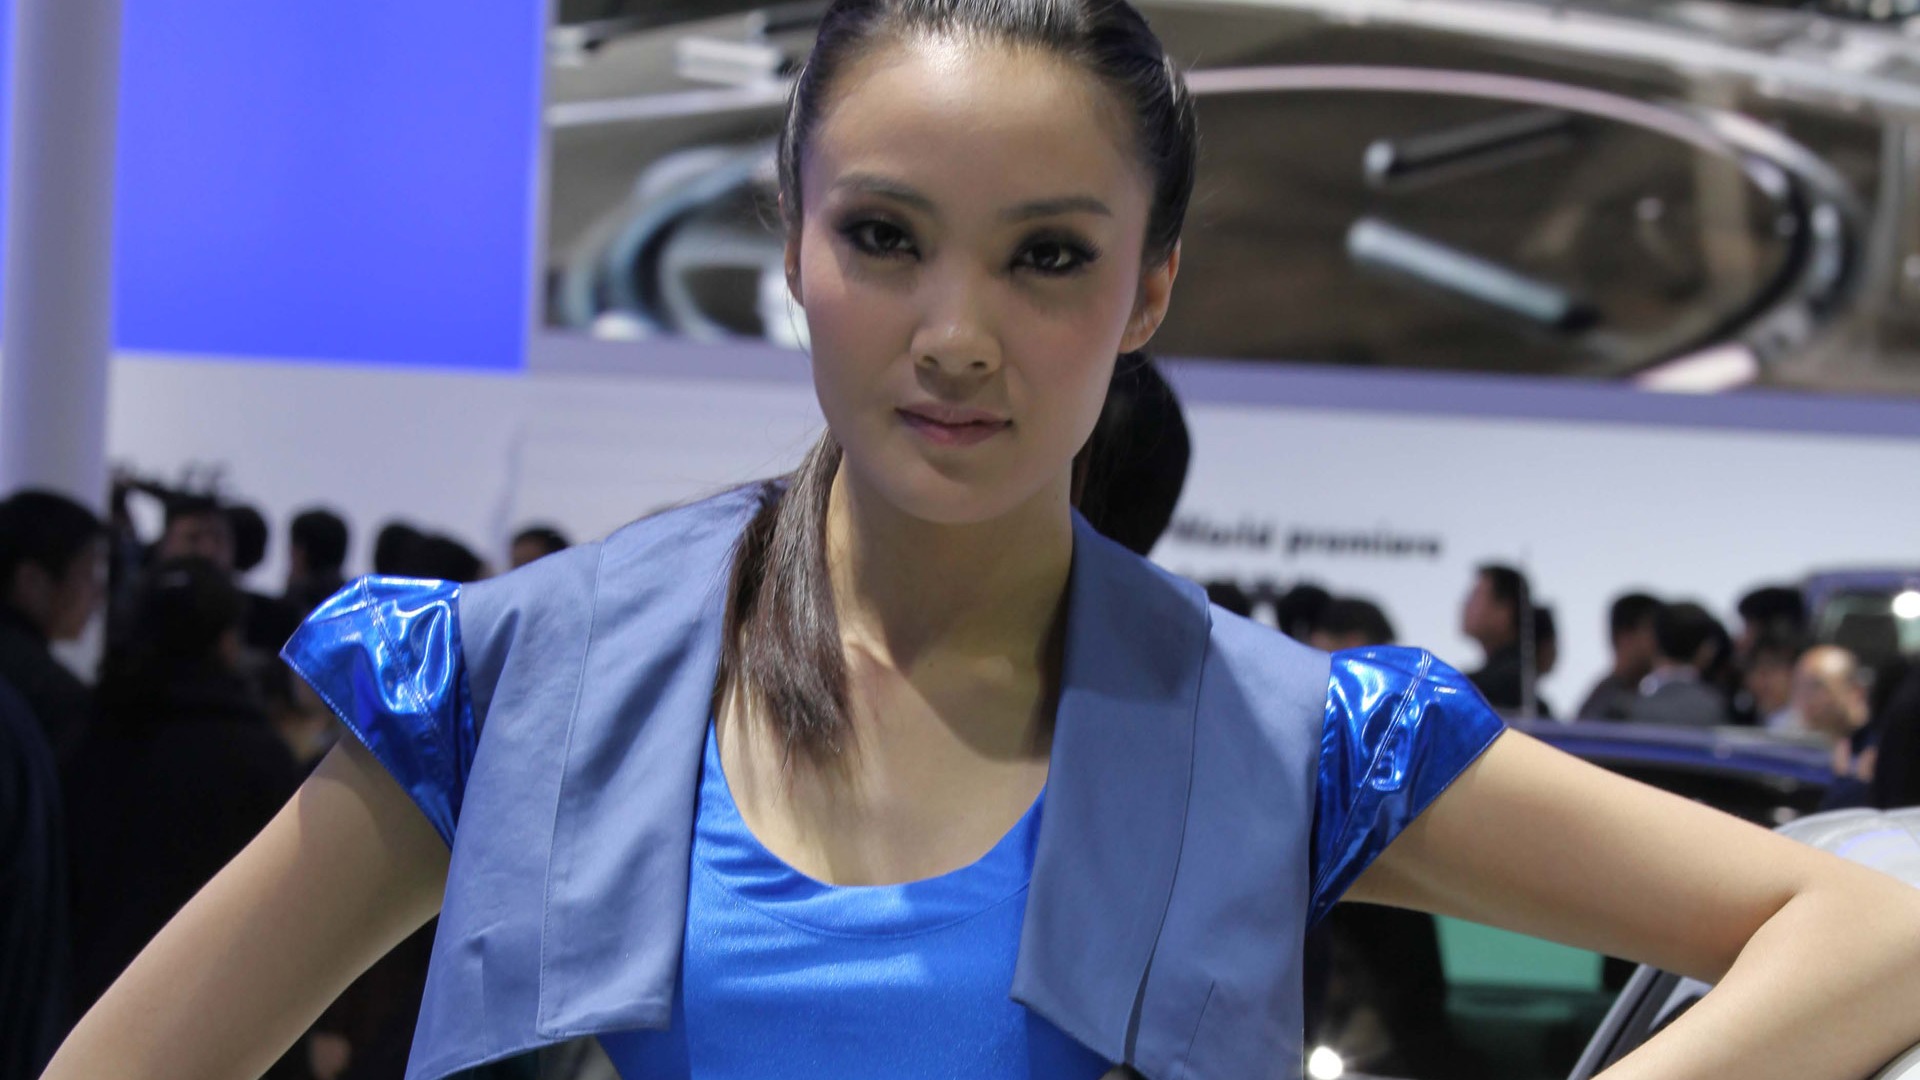 2010 Beijing International Auto Show beauty (2) (the wind chasing the clouds works) #8 - 1920x1080